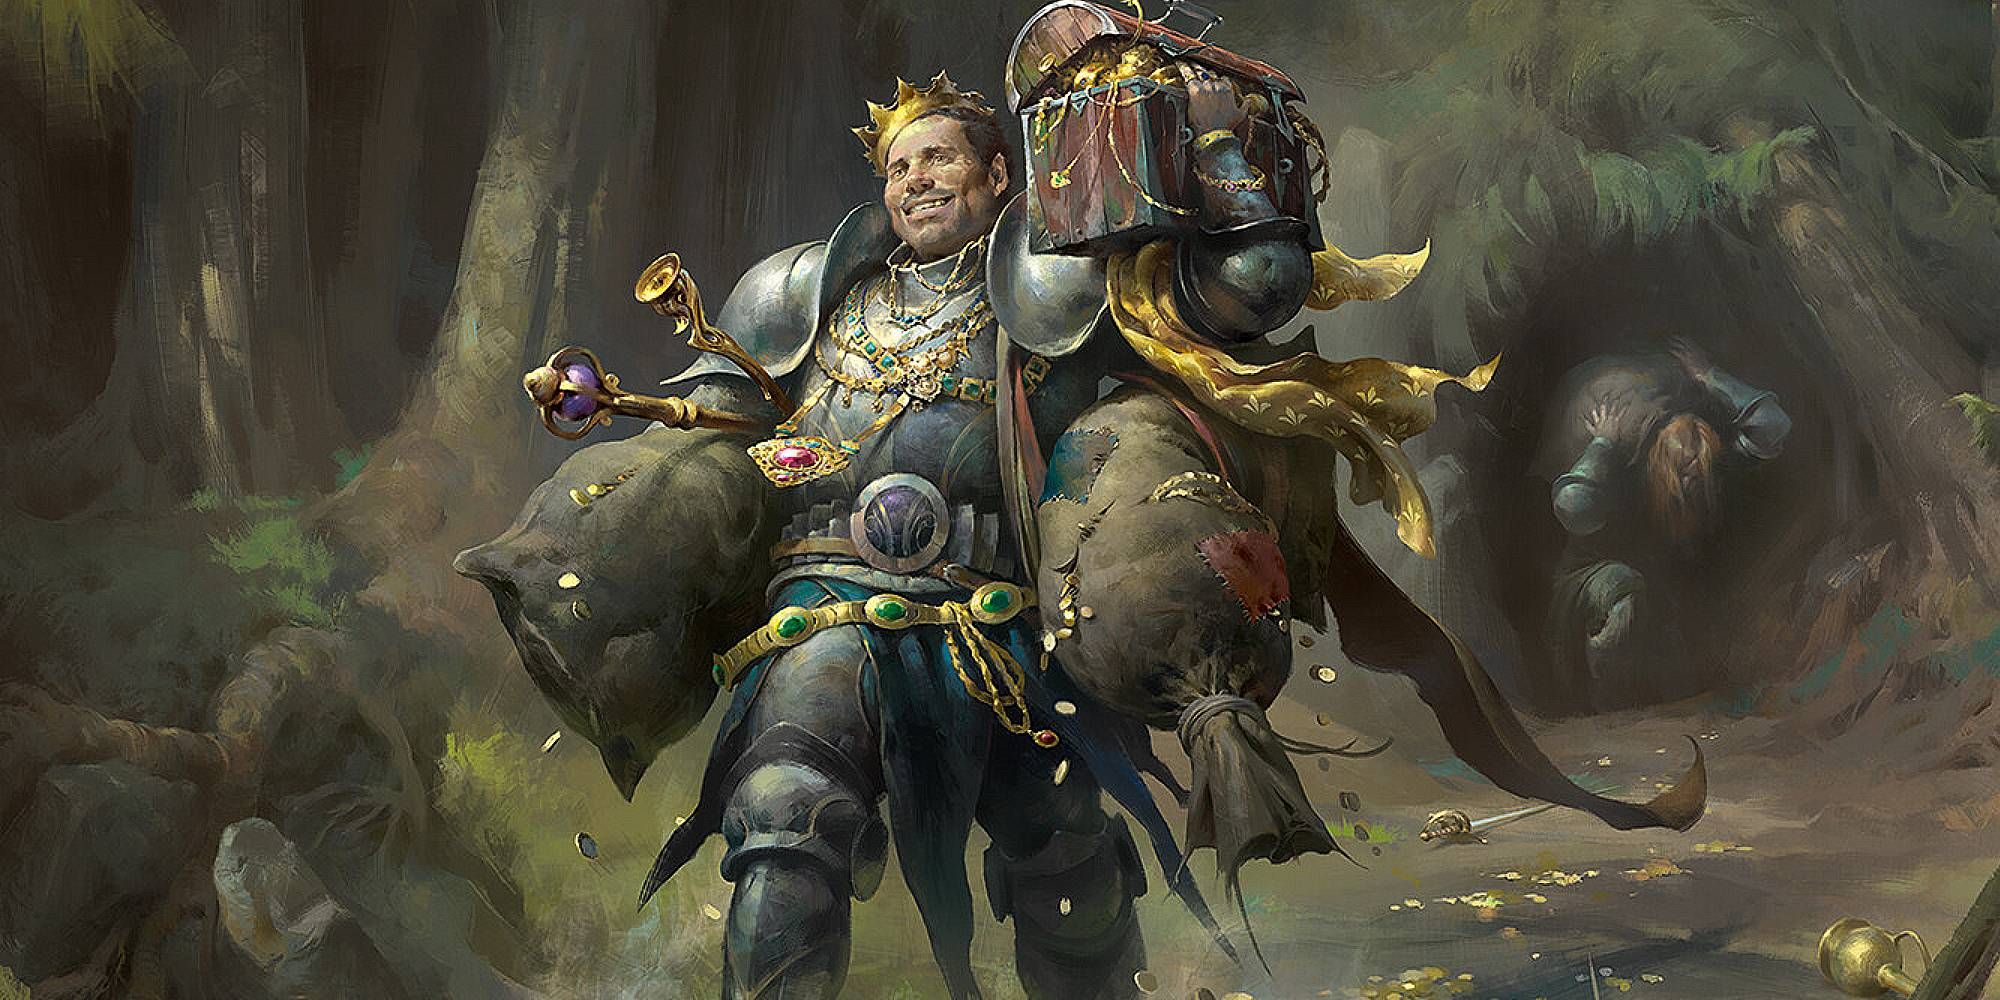 A bulky older man donned in armour, is bedazzled in jewllery and carries sacks of gold with a treasure chest on their shoulder